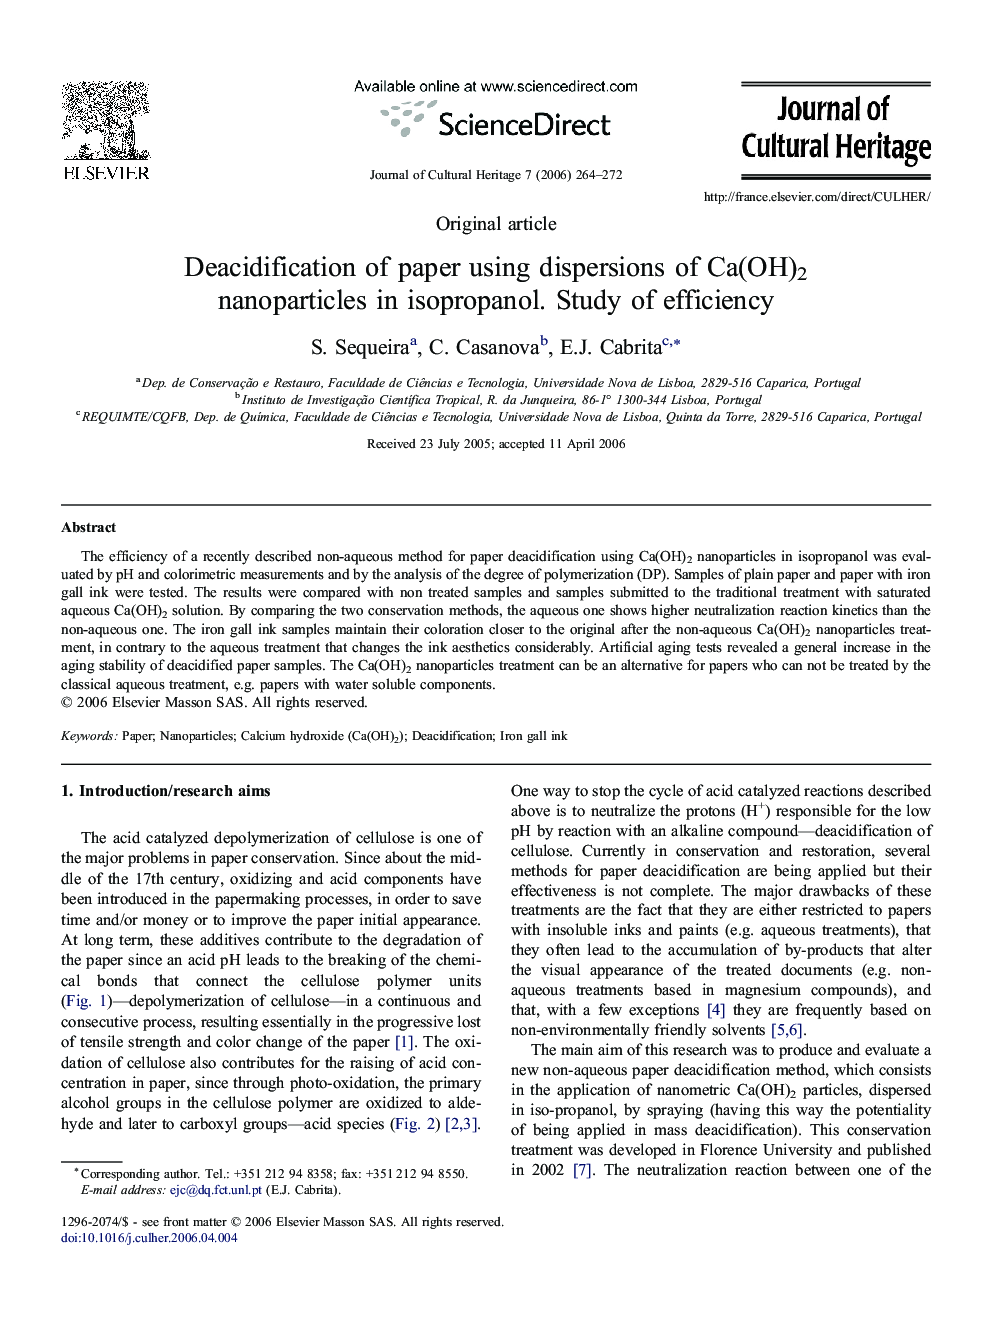 Deacidification of paper using dispersions of Ca(OH)2 nanoparticles in isopropanol. Study of efficiency